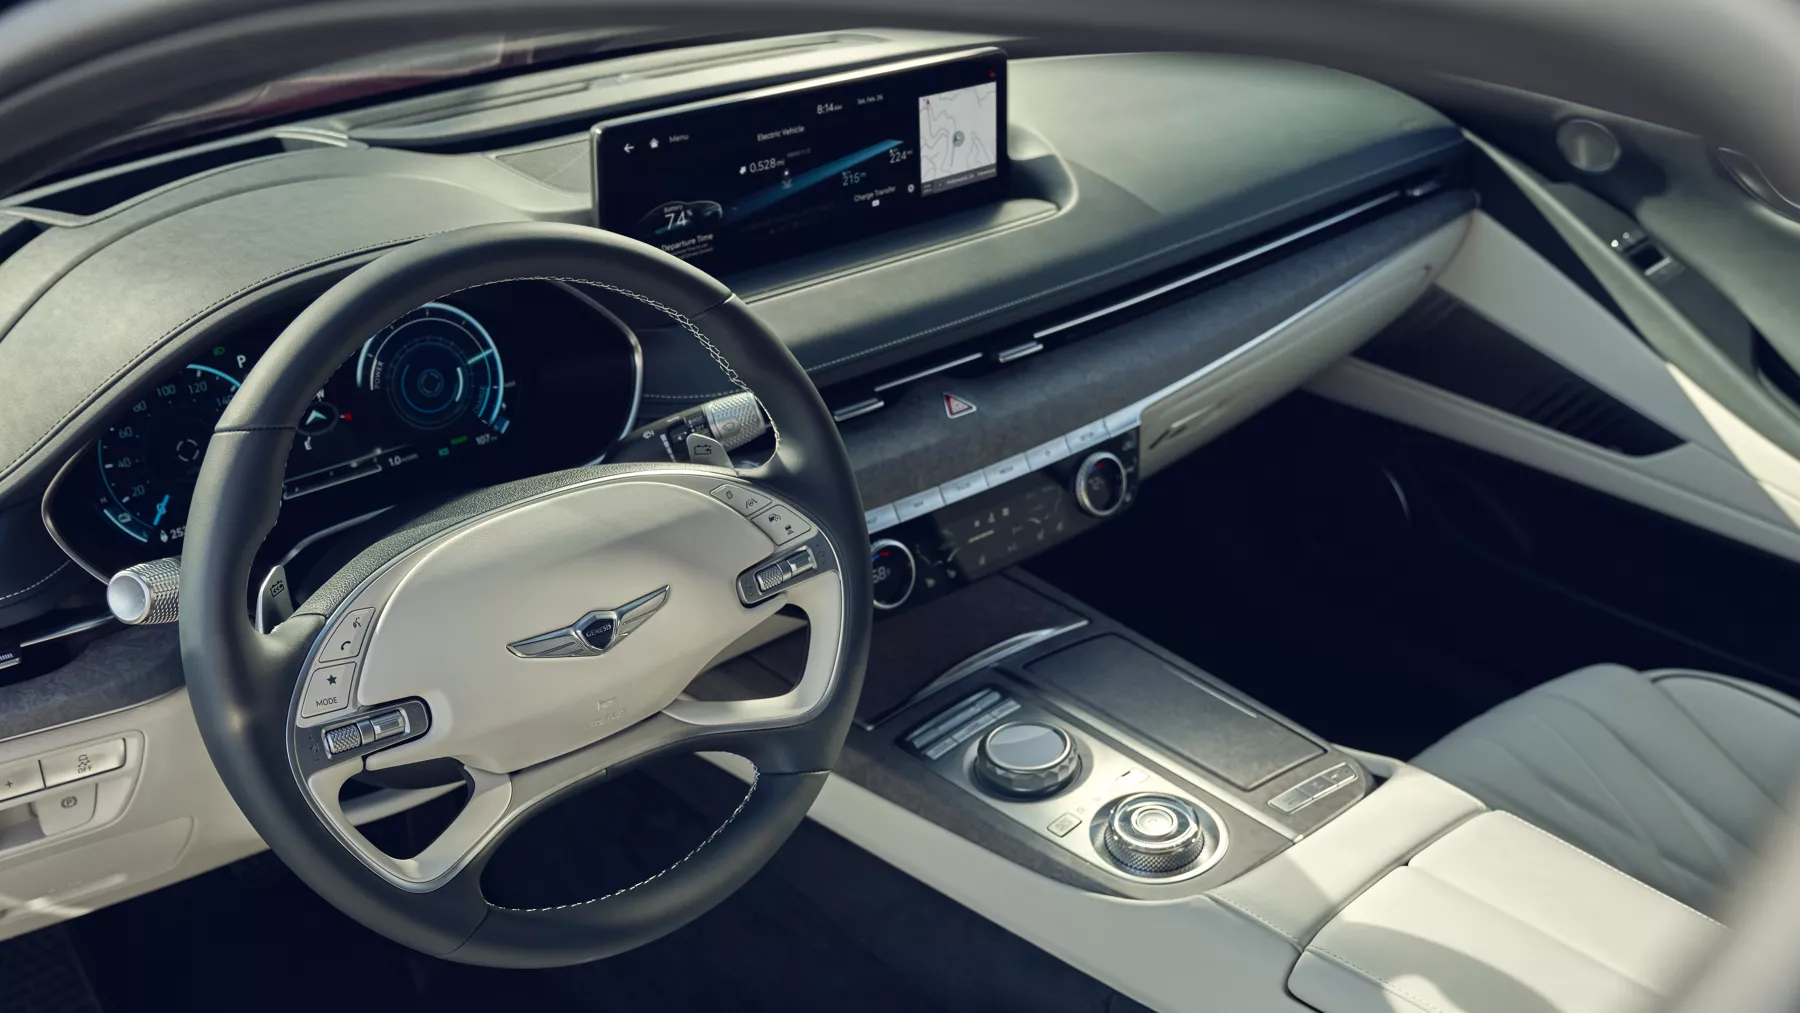 Electrified G80 steering wheel and infotainment screen.